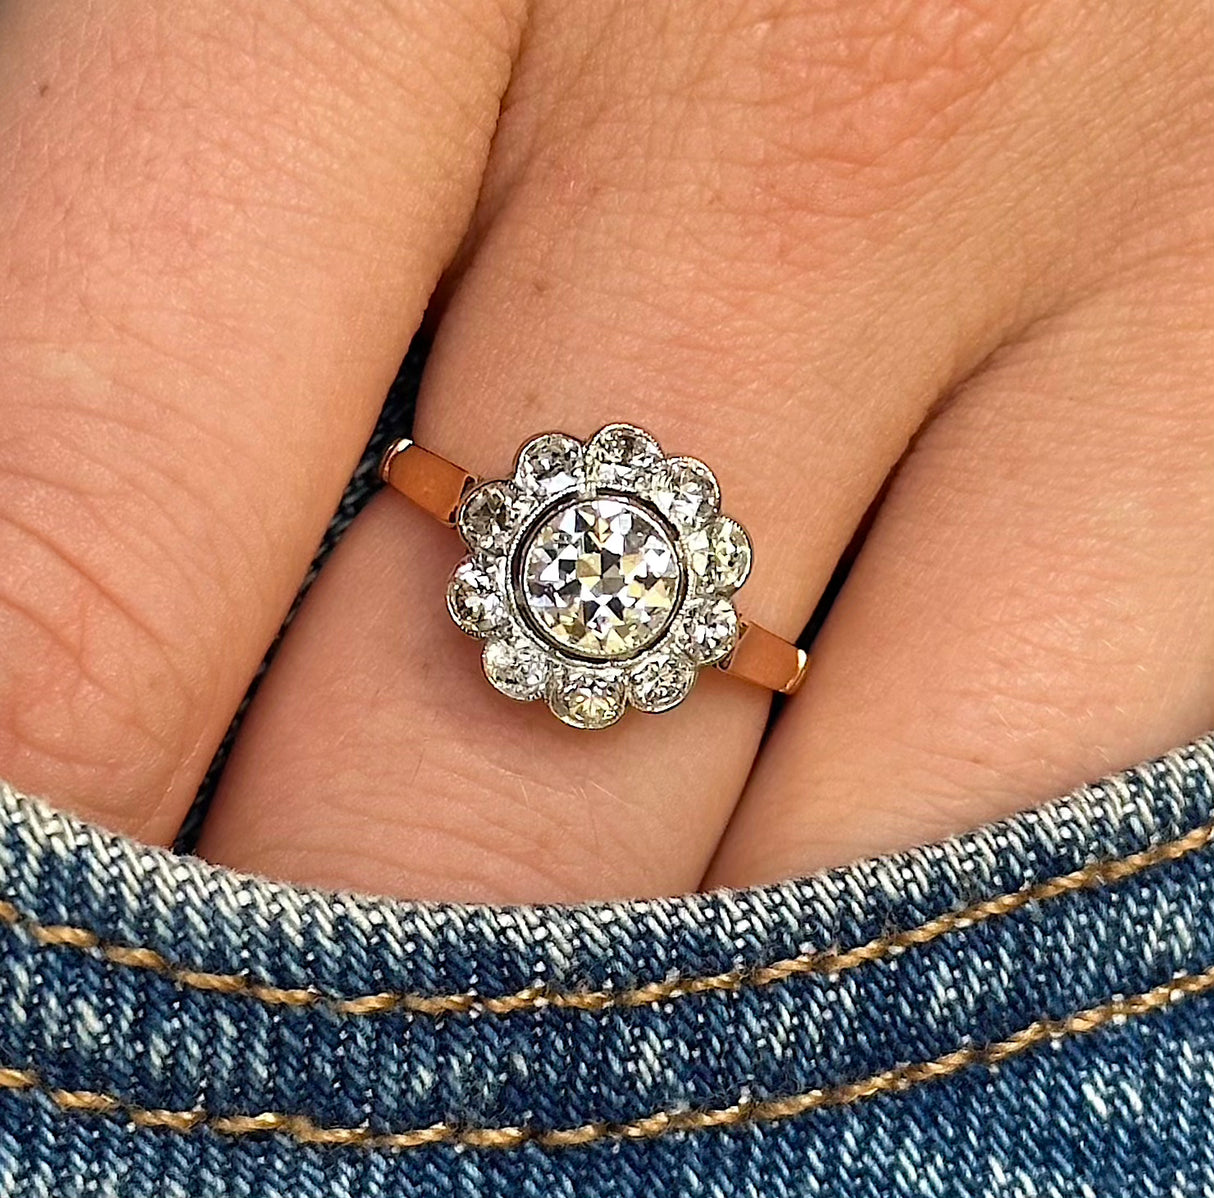 antique diamond cluster engagement ring, worn on hand and placed in pocket of denim jeans,  front view.